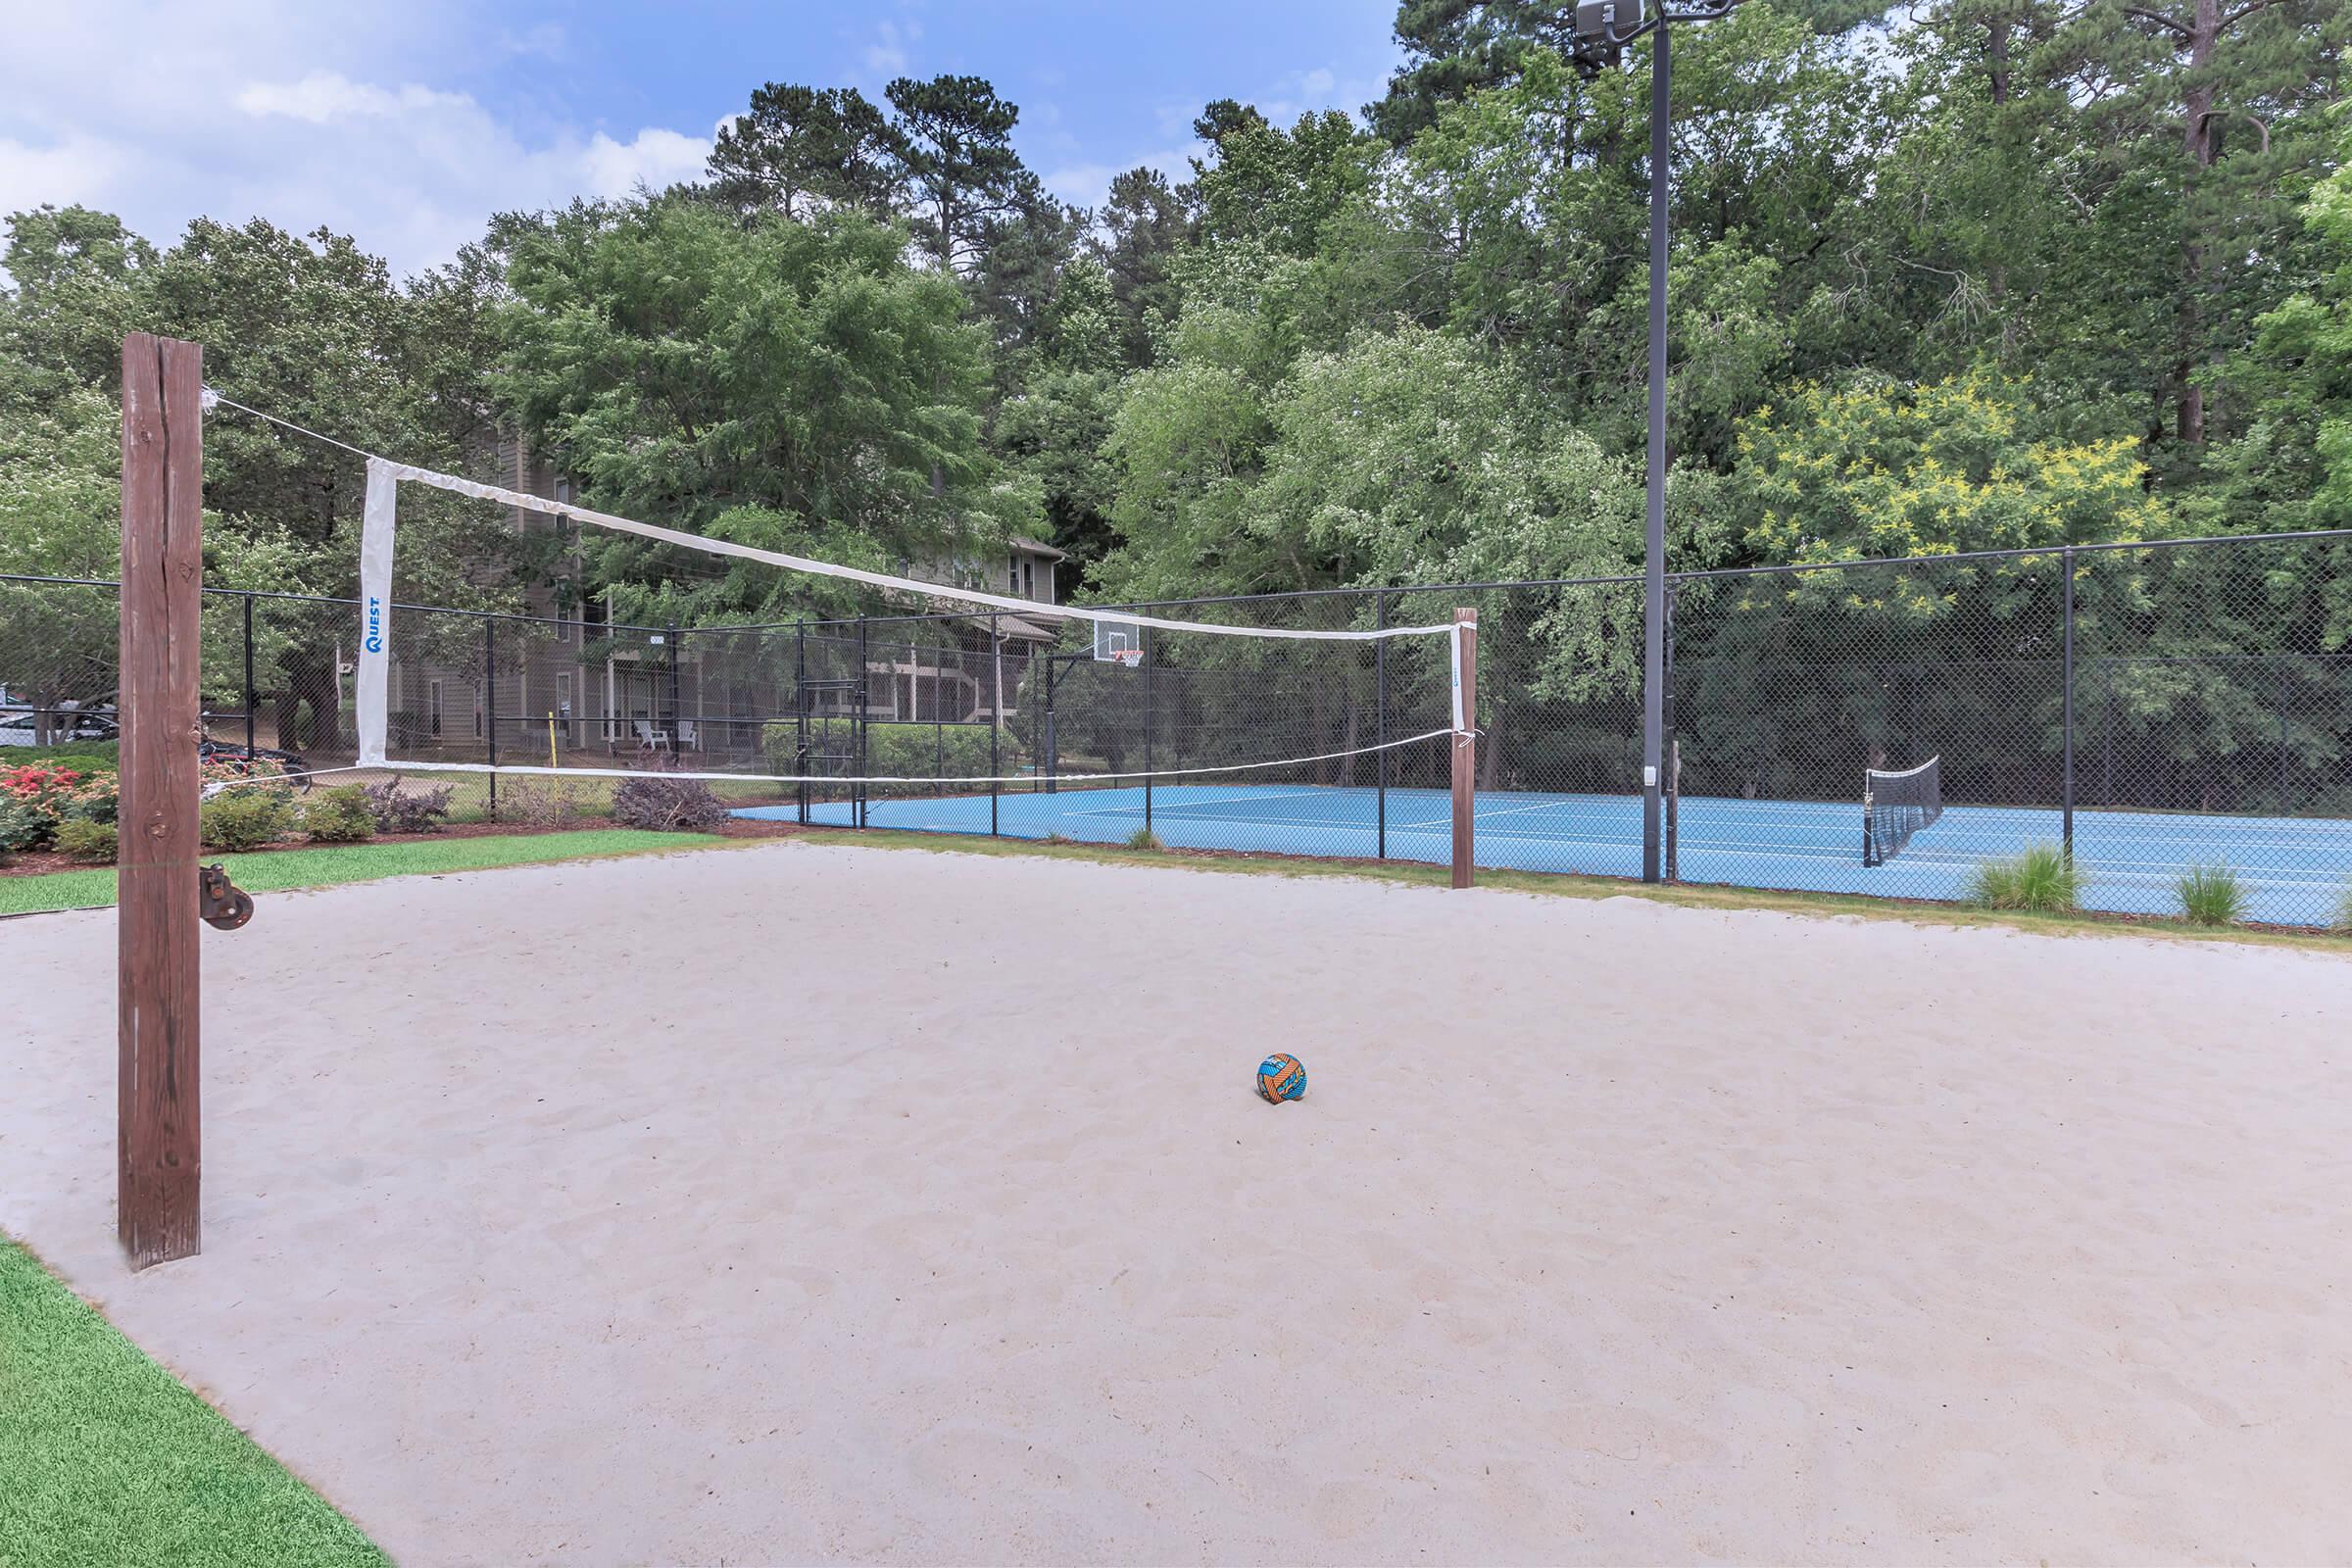 SAND VOLLEYBALL COURT AT SHADOWOOD APARTMENTS